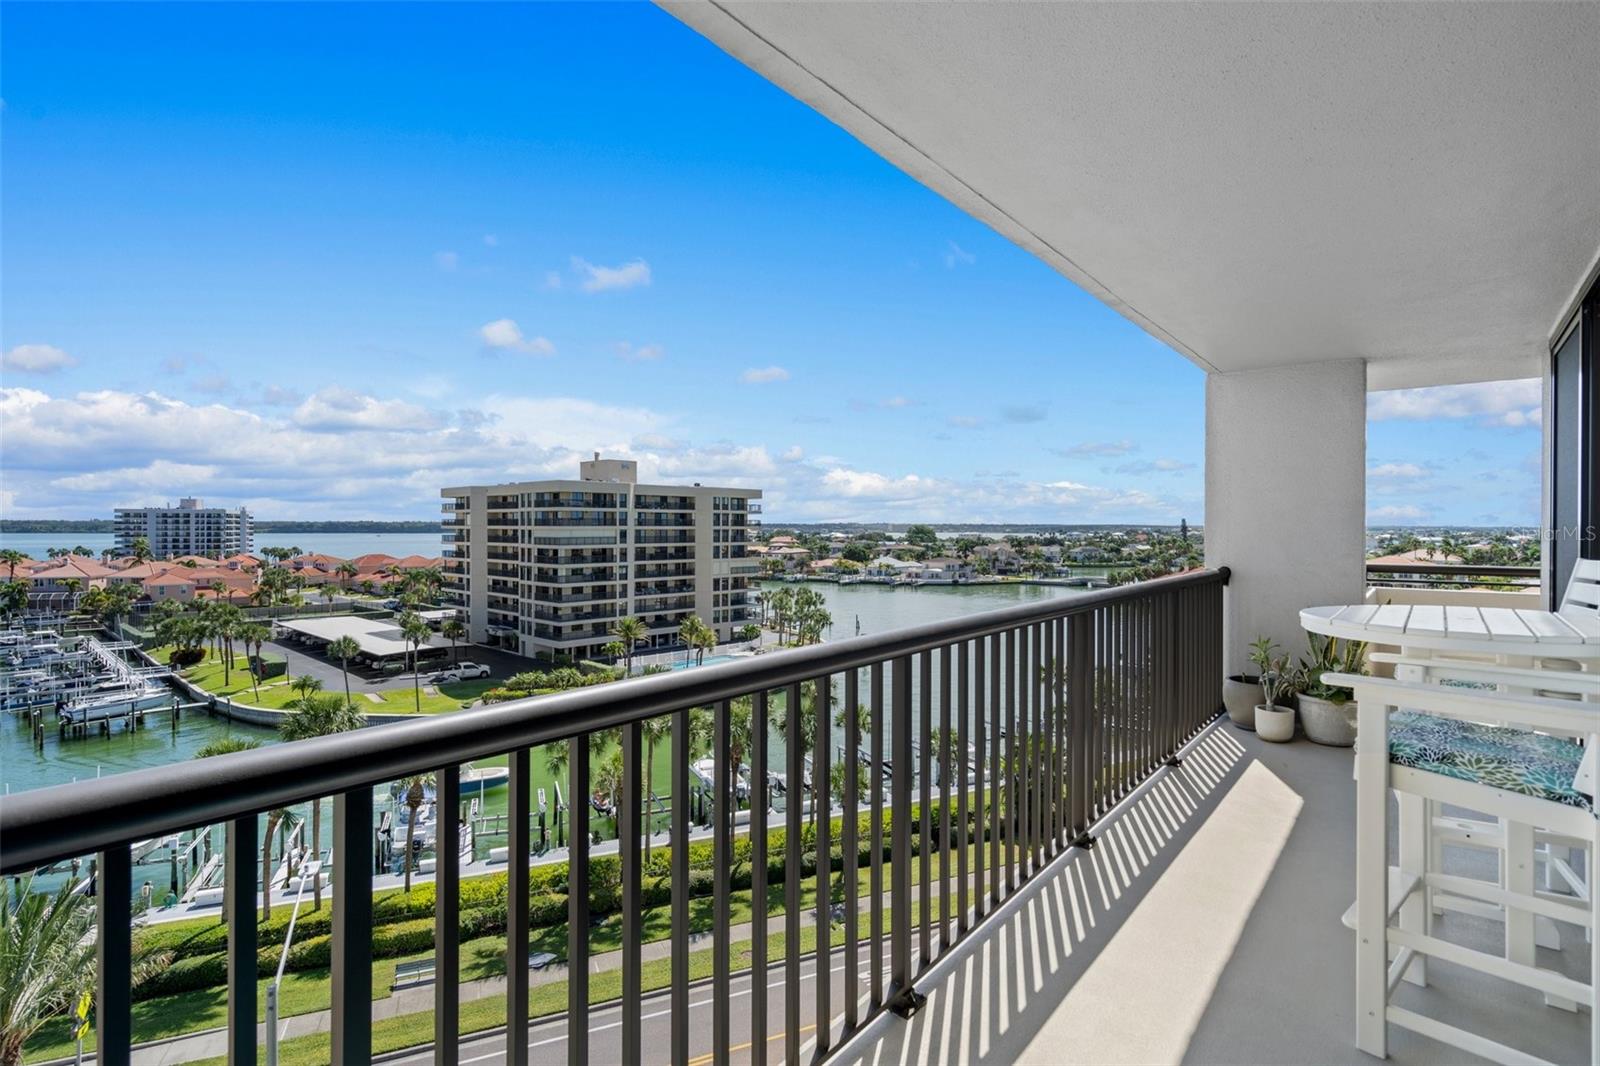 Take in the views from the wrap around balcony.